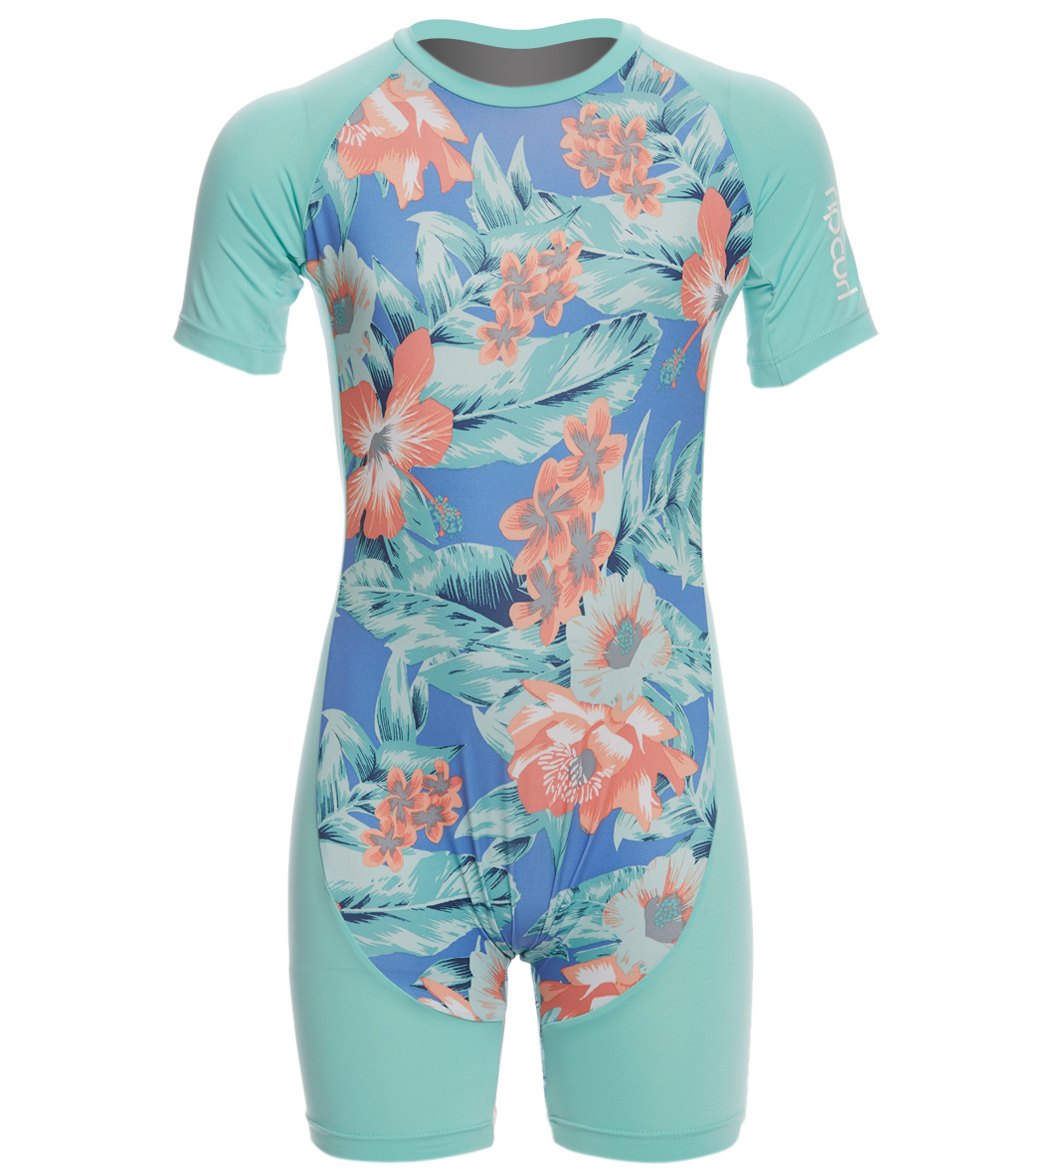 Rip Curl Girl's Tiny Dolphin Short Sleeve Springsuit at SwimOutlet.com